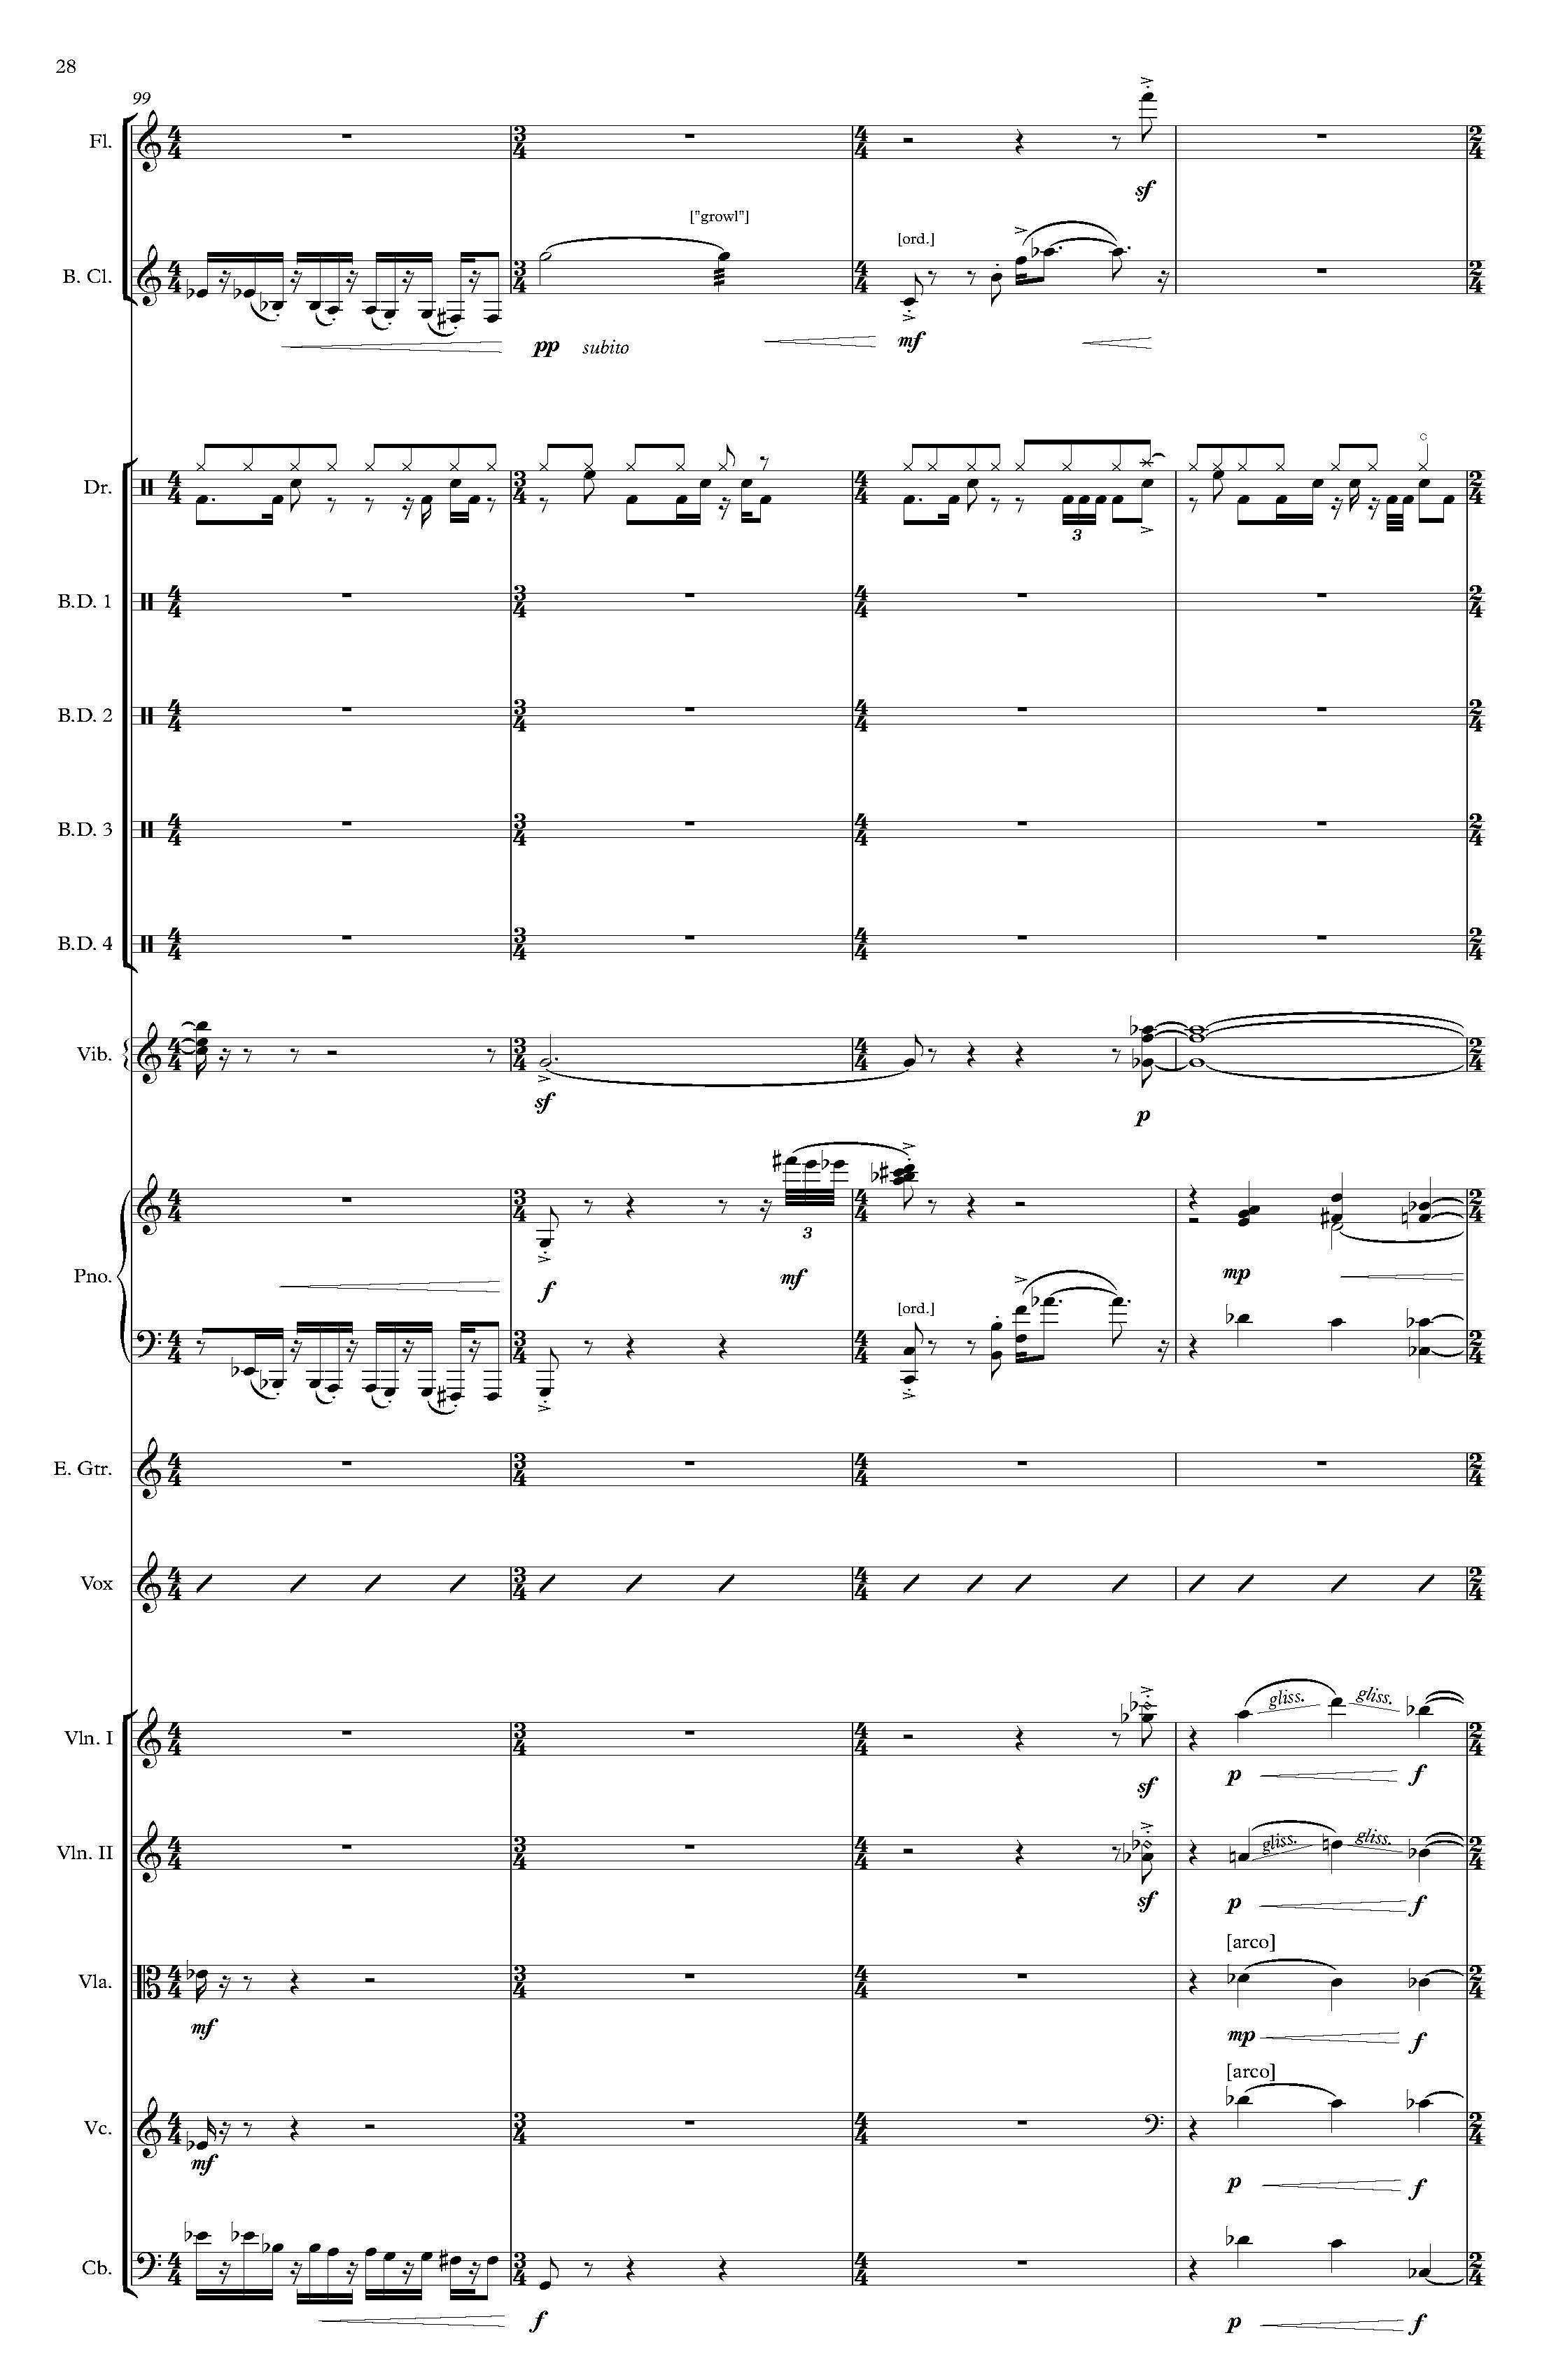 The Rembrandt of Avenue A - Complete Score_Page_34.jpg